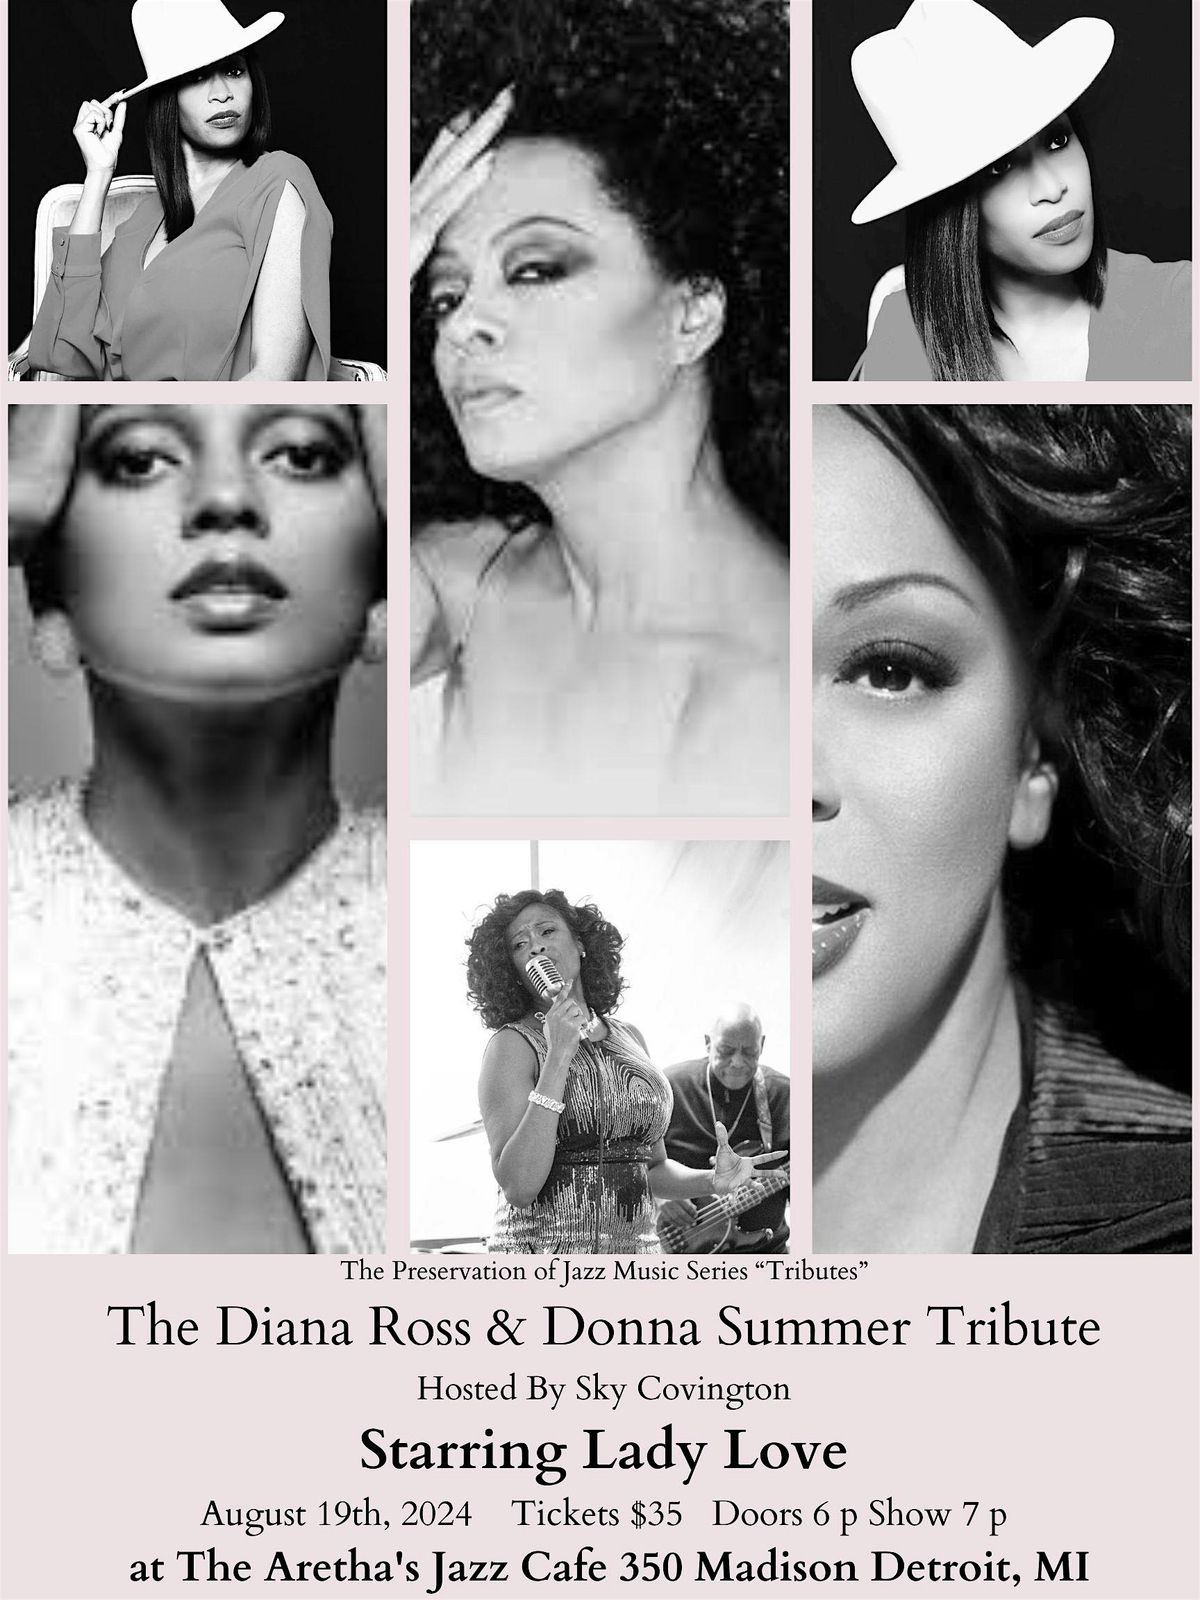 The Diana Ross & Donna Summer Tribute ft. Lady Love